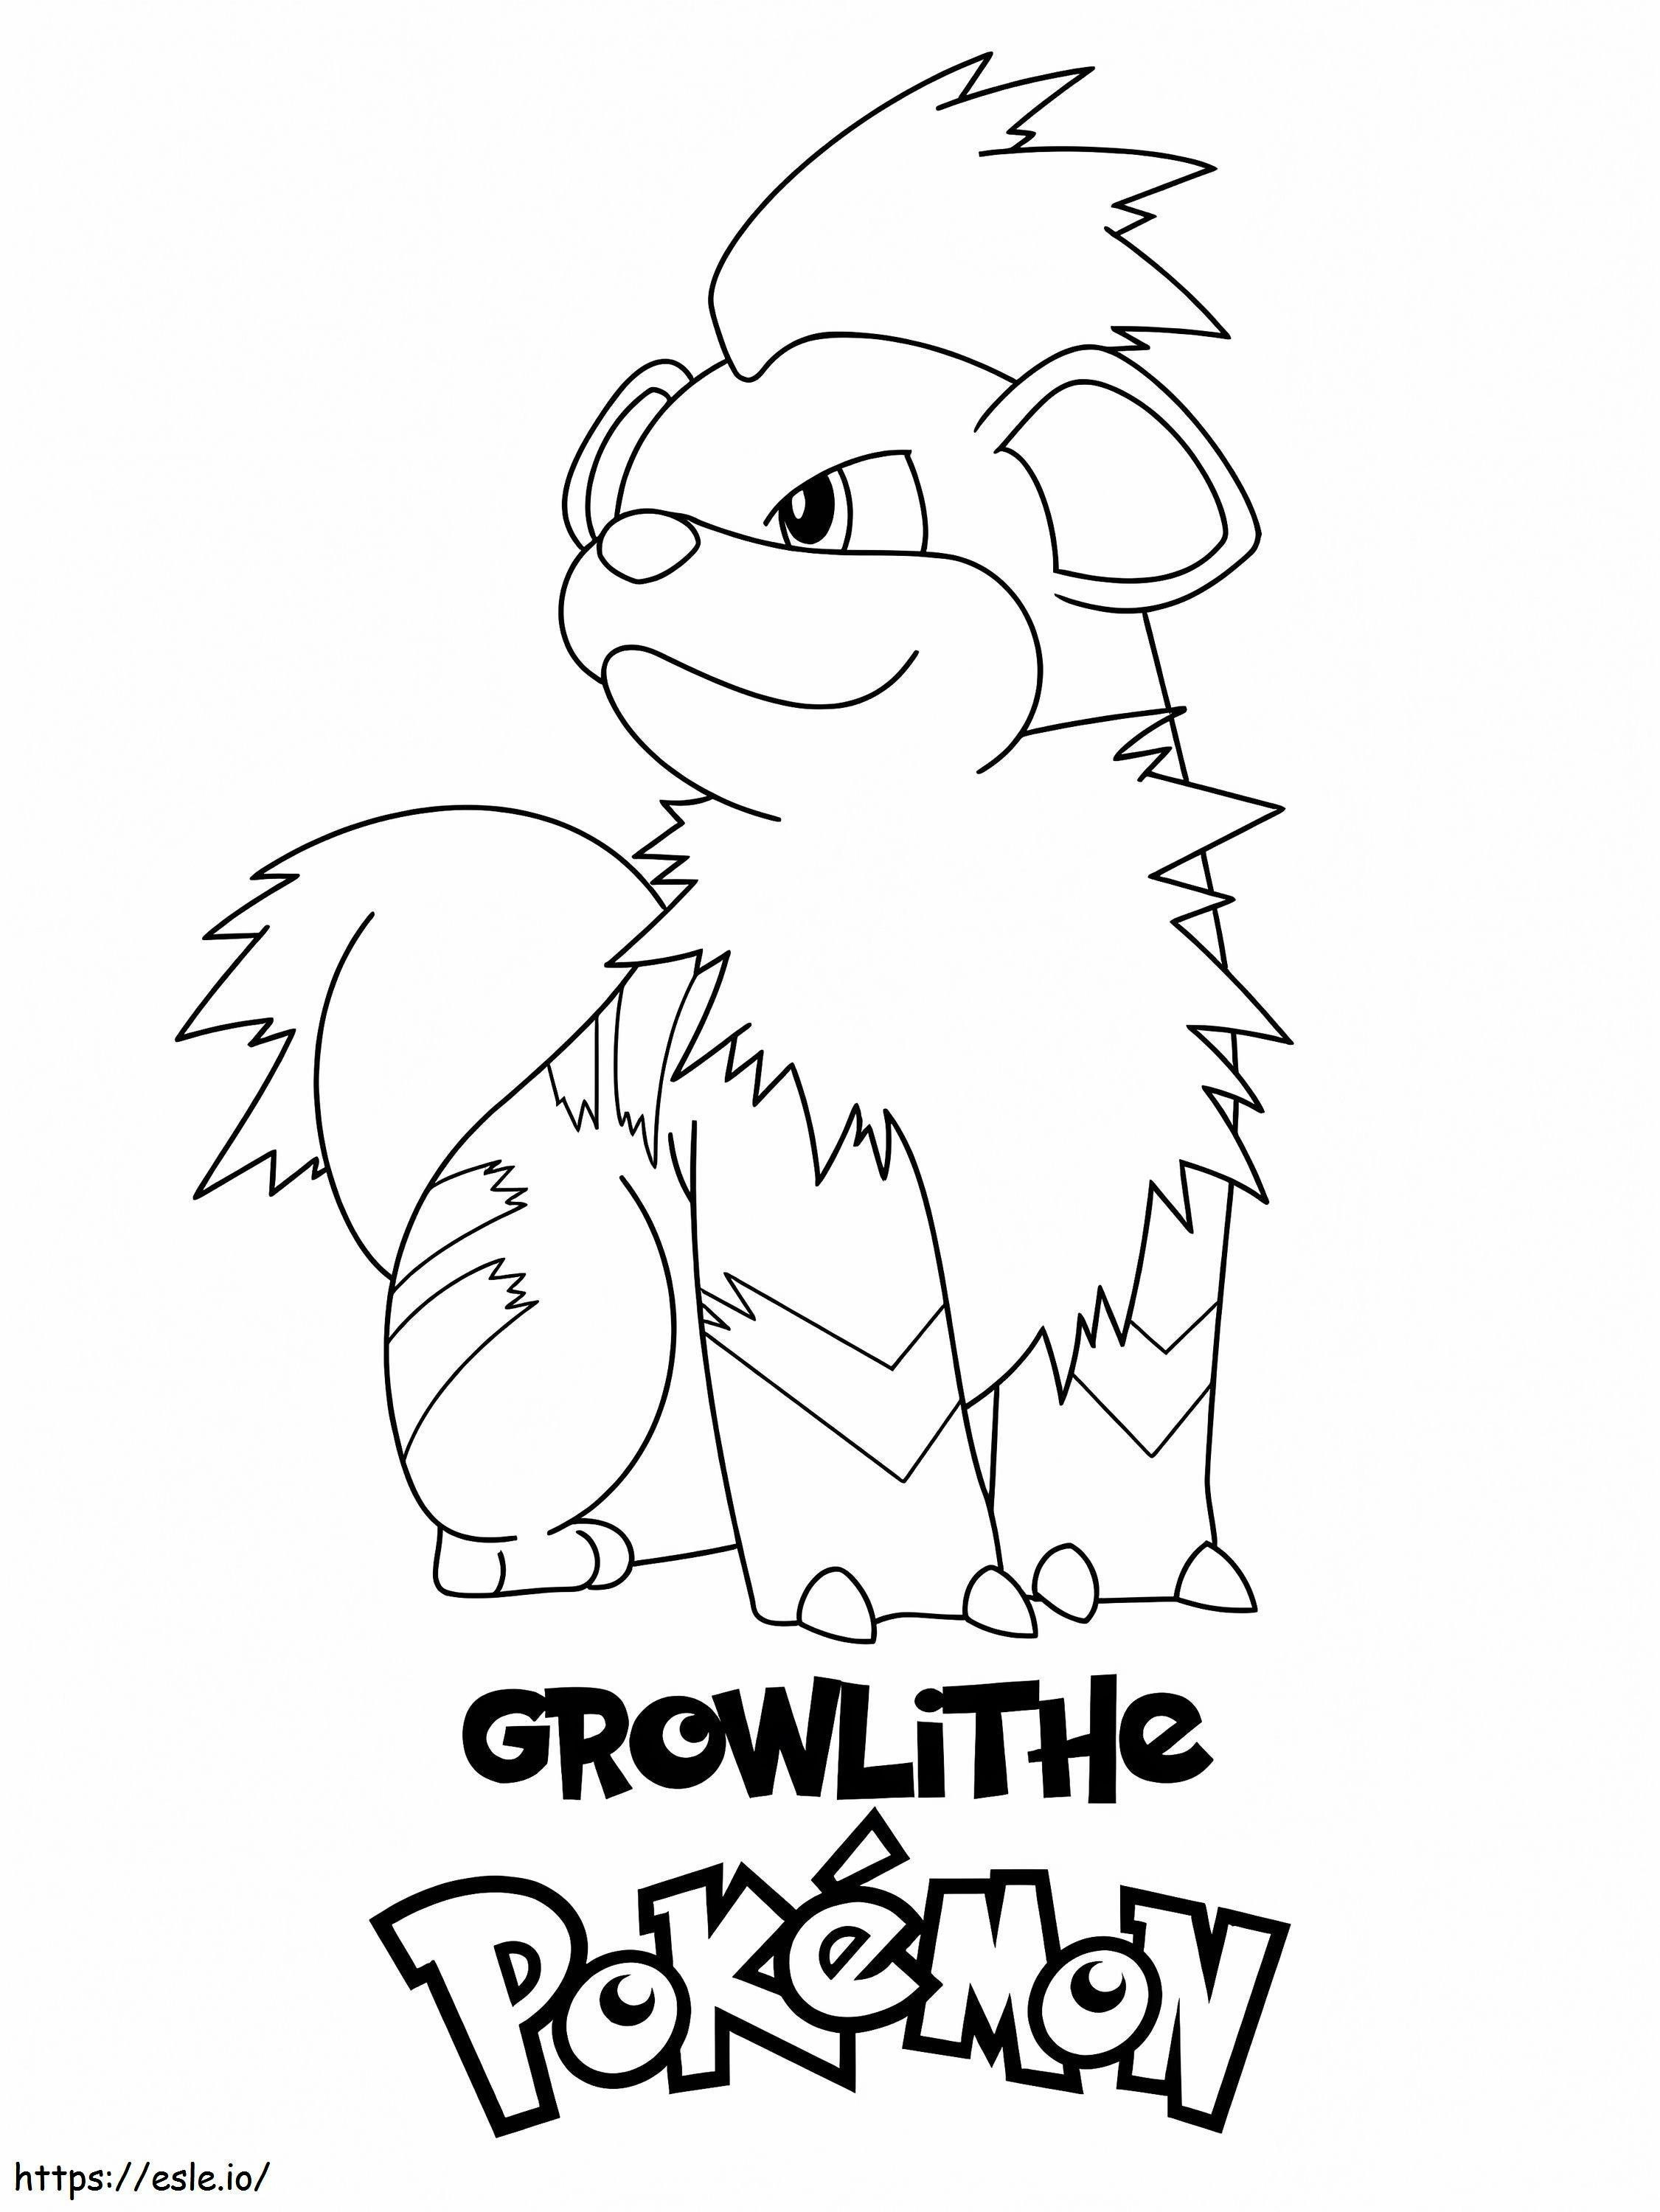 Awesome Growlithe coloring page